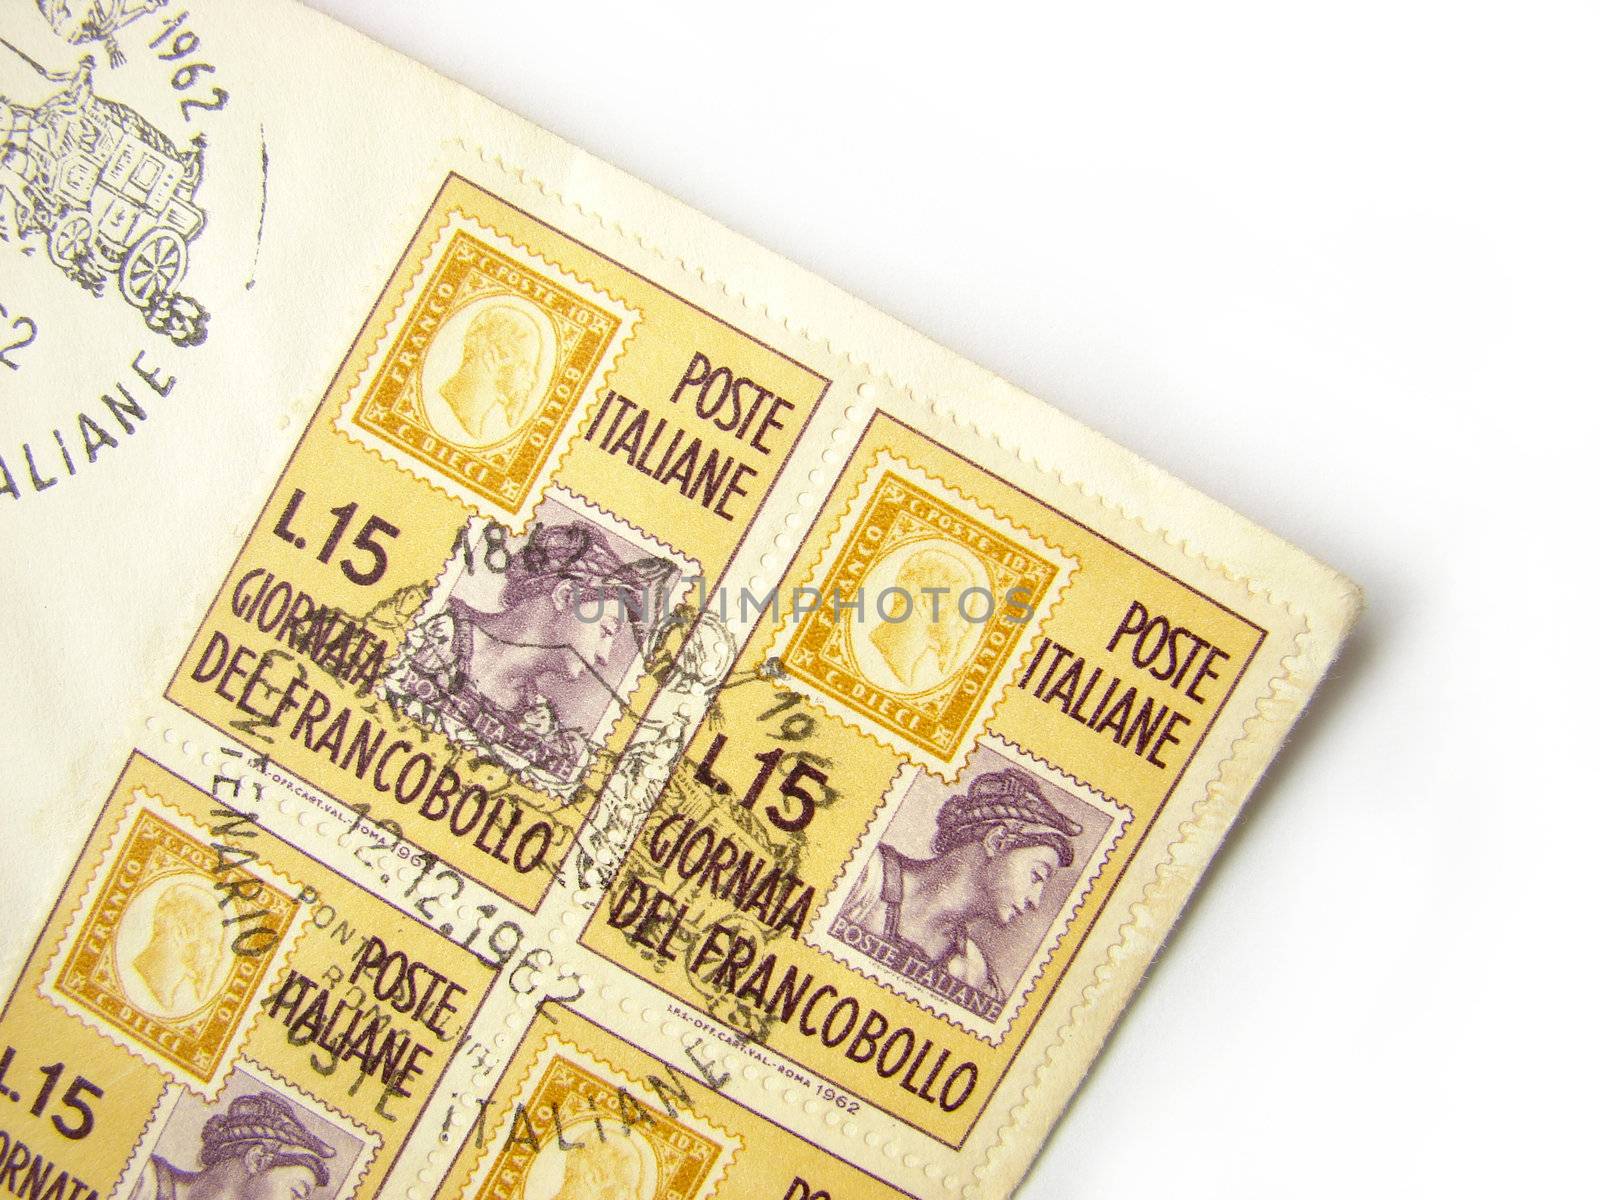 Italy postage stamps on envelope by Flaps